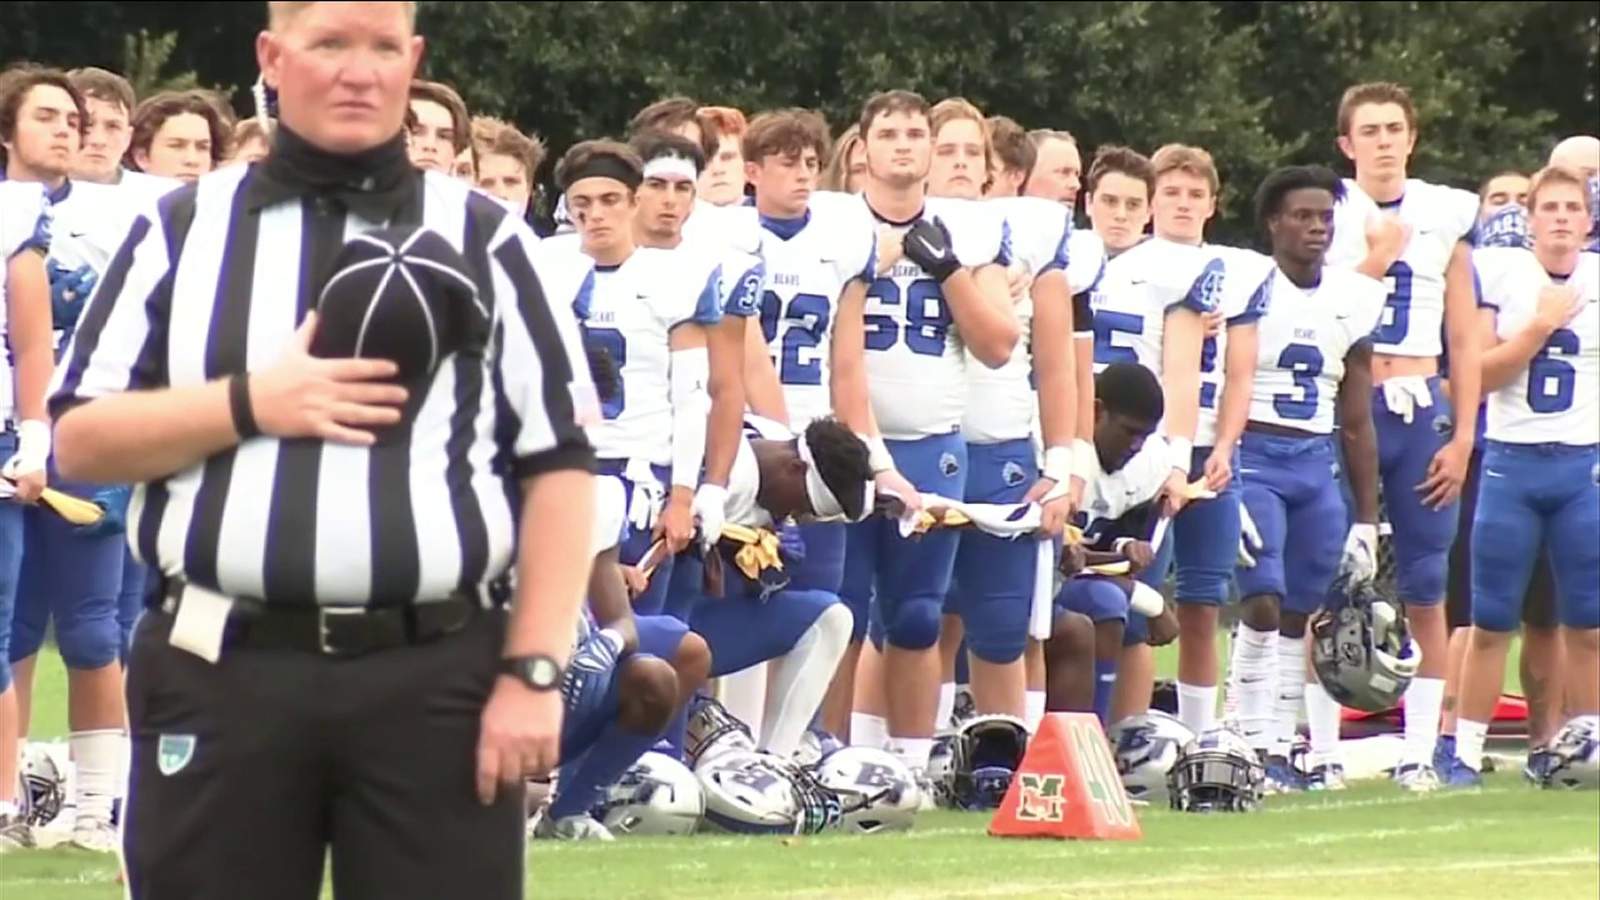 Move by some Bartram Trail football players to kneel during national anthem stirs debate